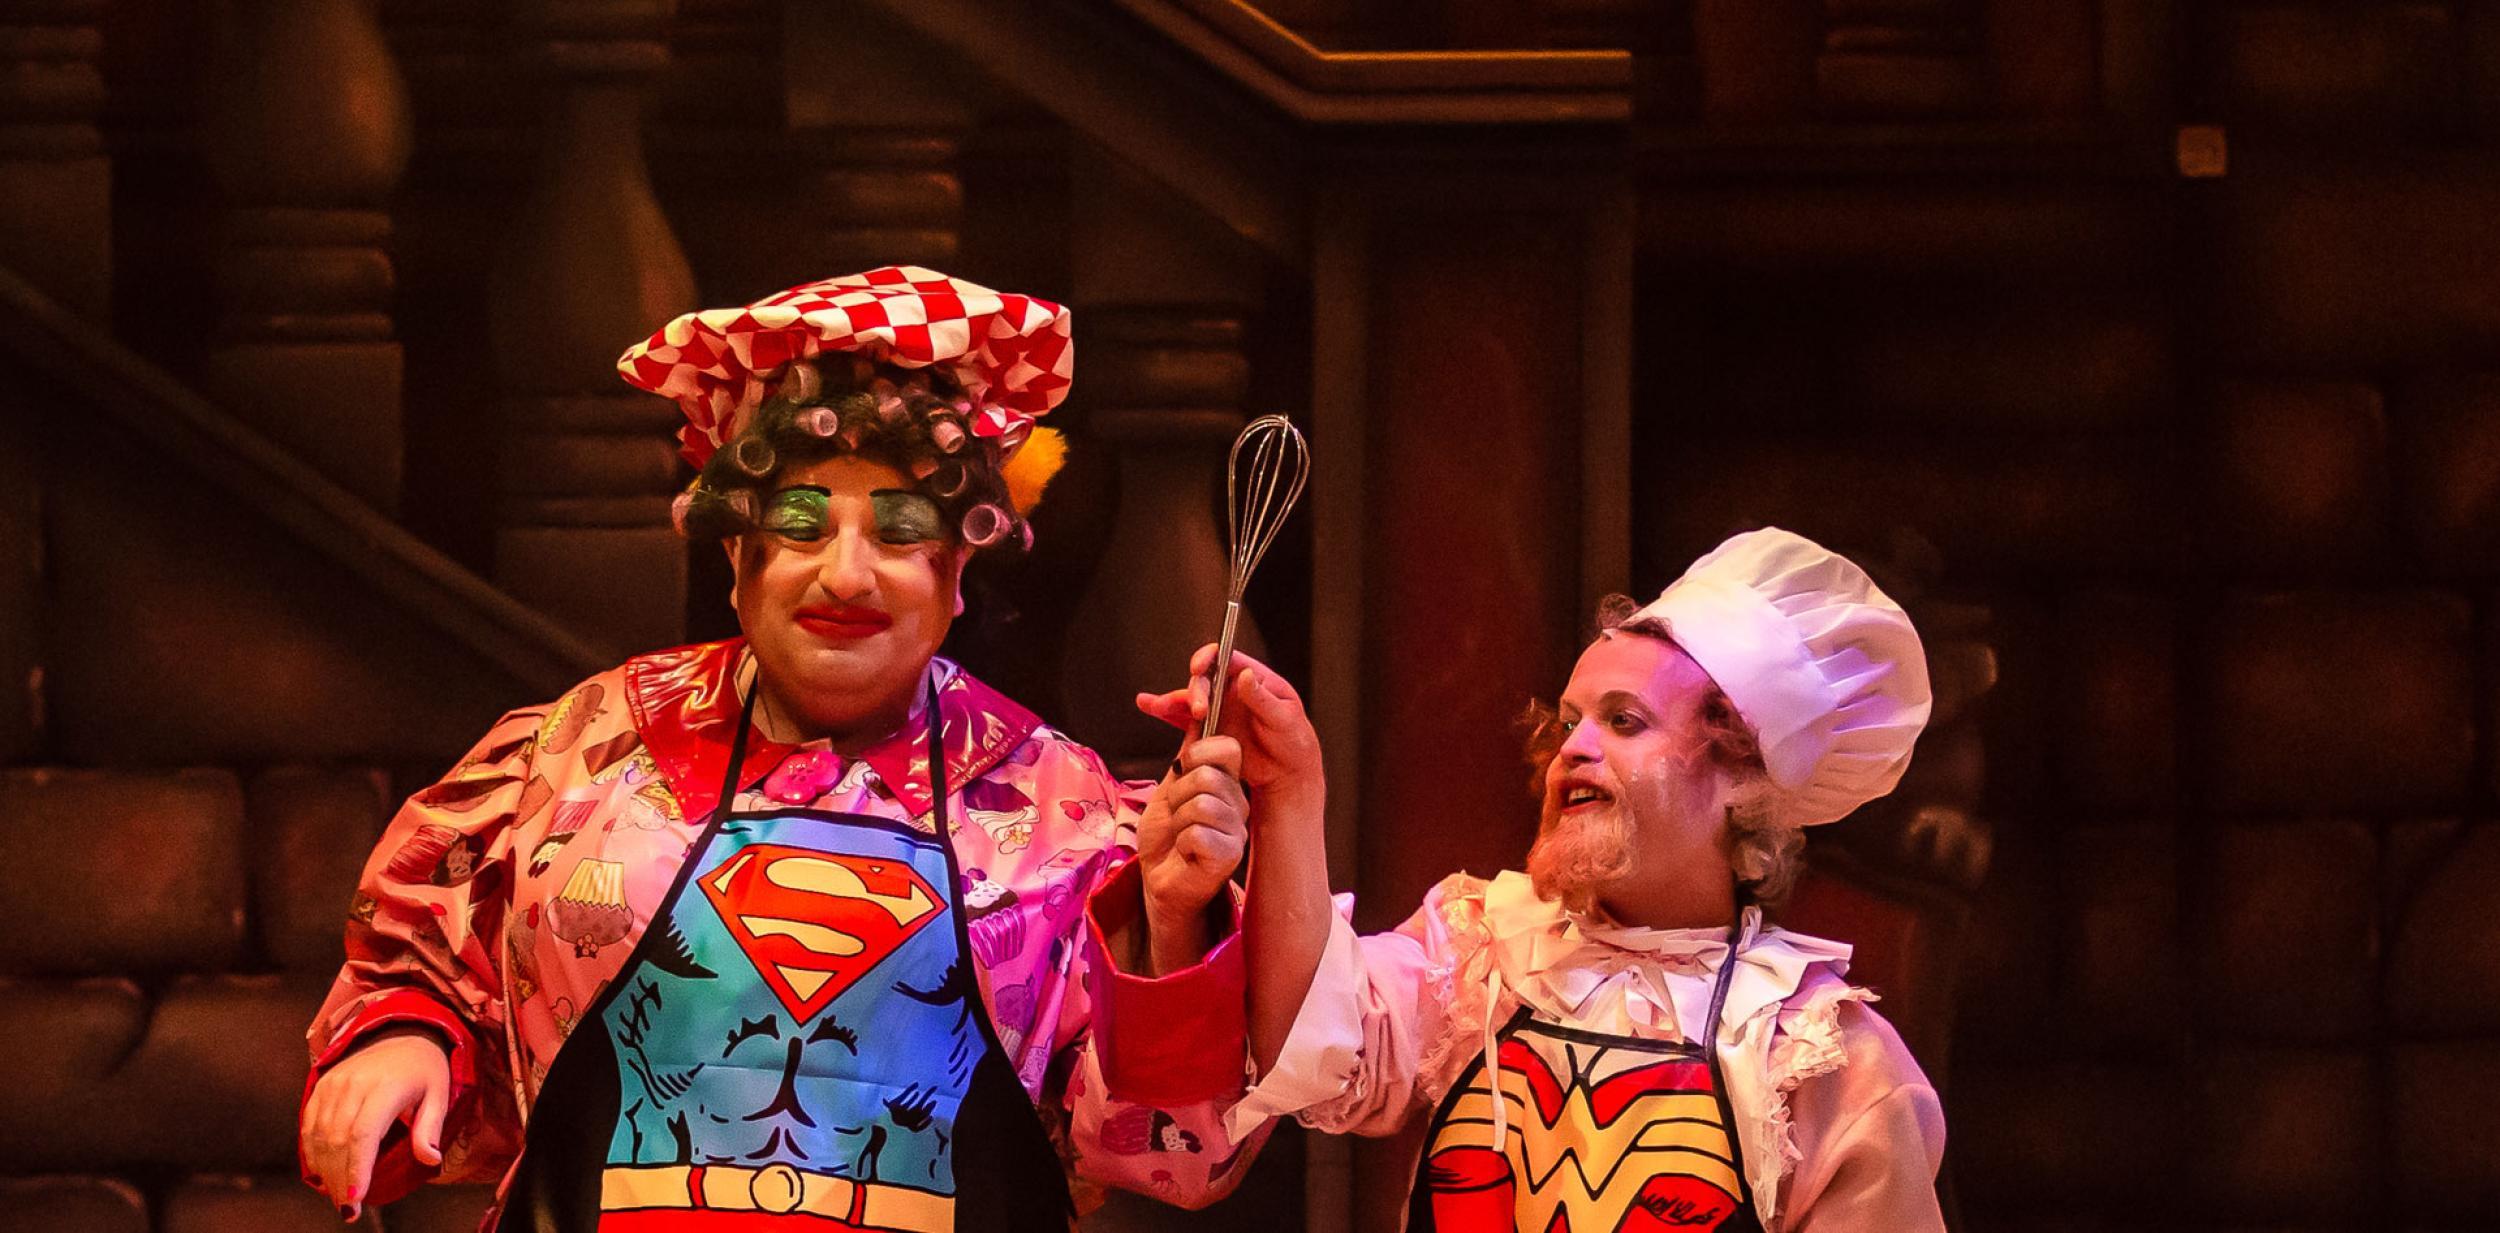 panto characters attempting to make a cake